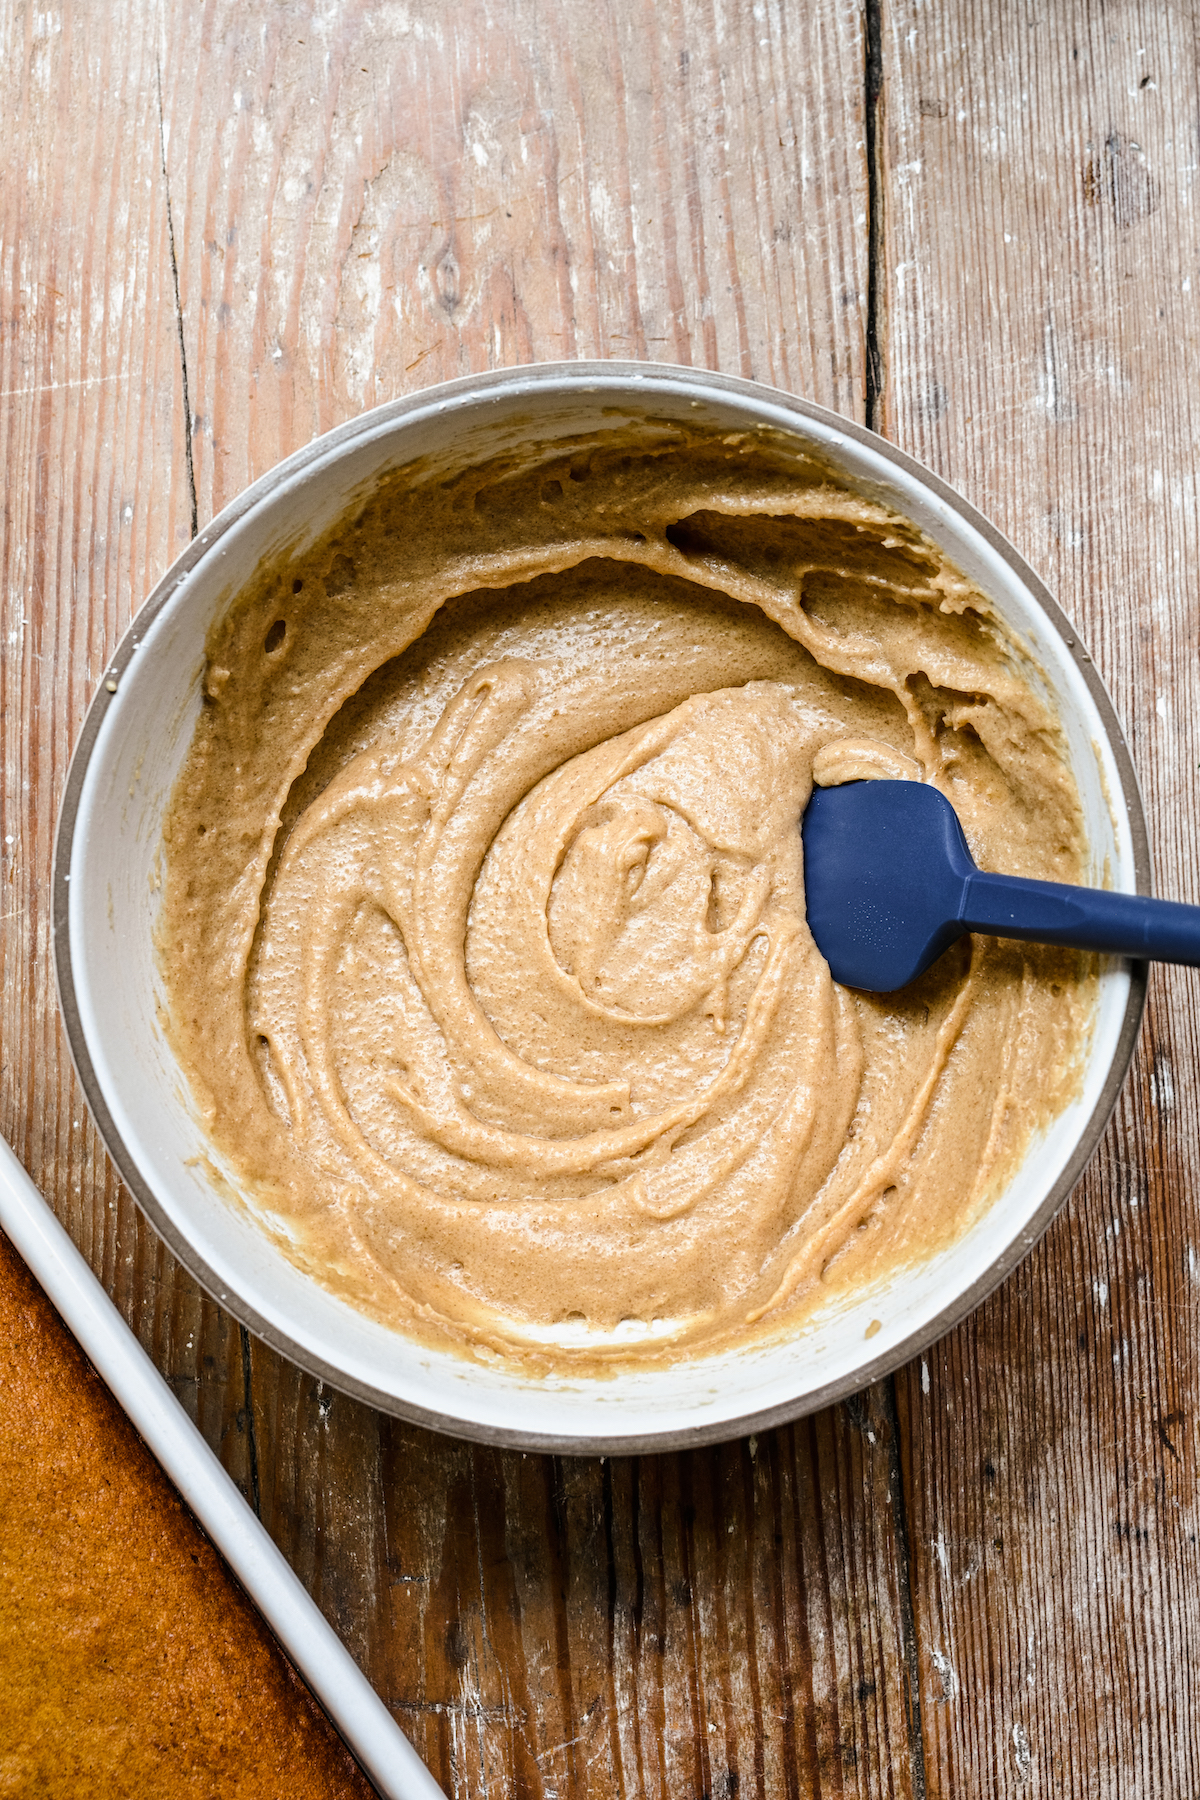 Creamy, light-brown frosting in a bowl.